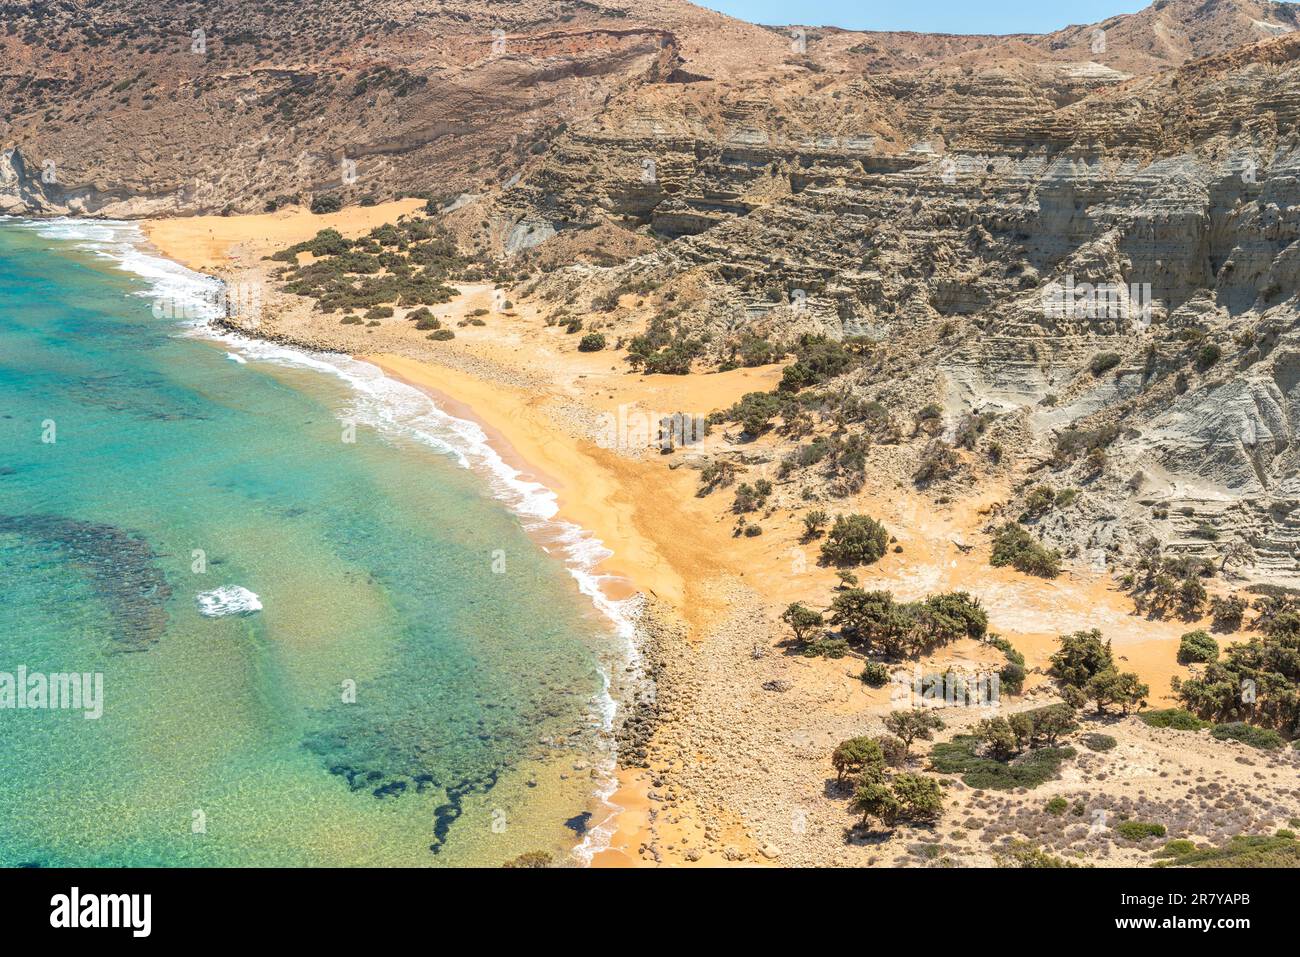 Potamos bay with the long reddish beach and shallow water, formed at the exit of a small canyon with majestic geological clay formations and steep Stock Photo